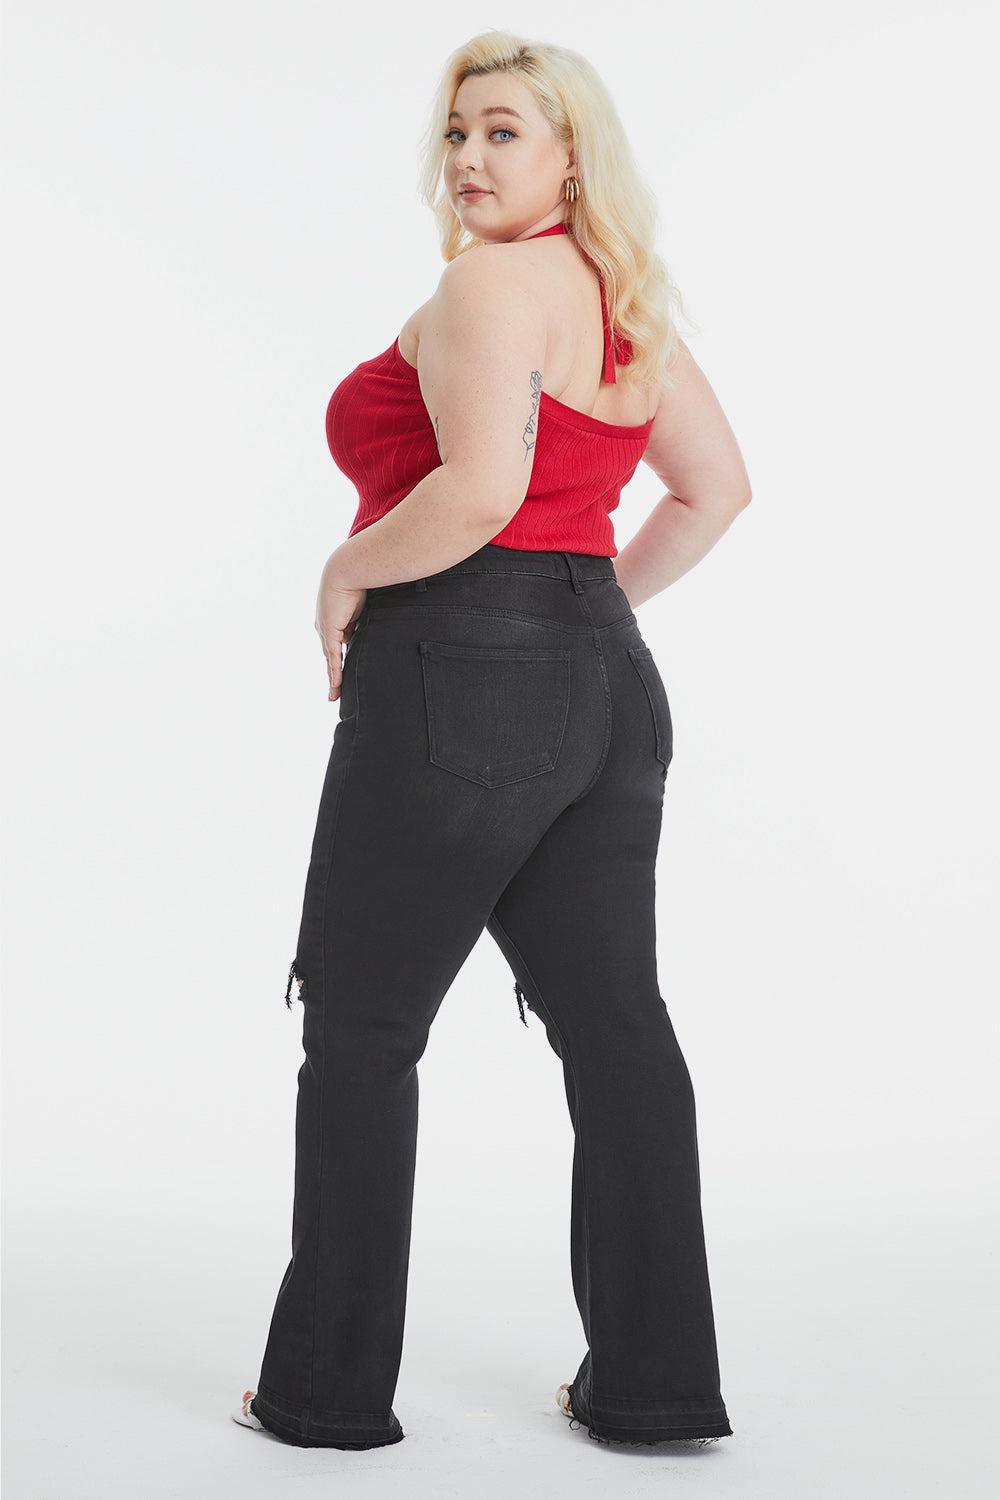 a woman in a red top and black pants